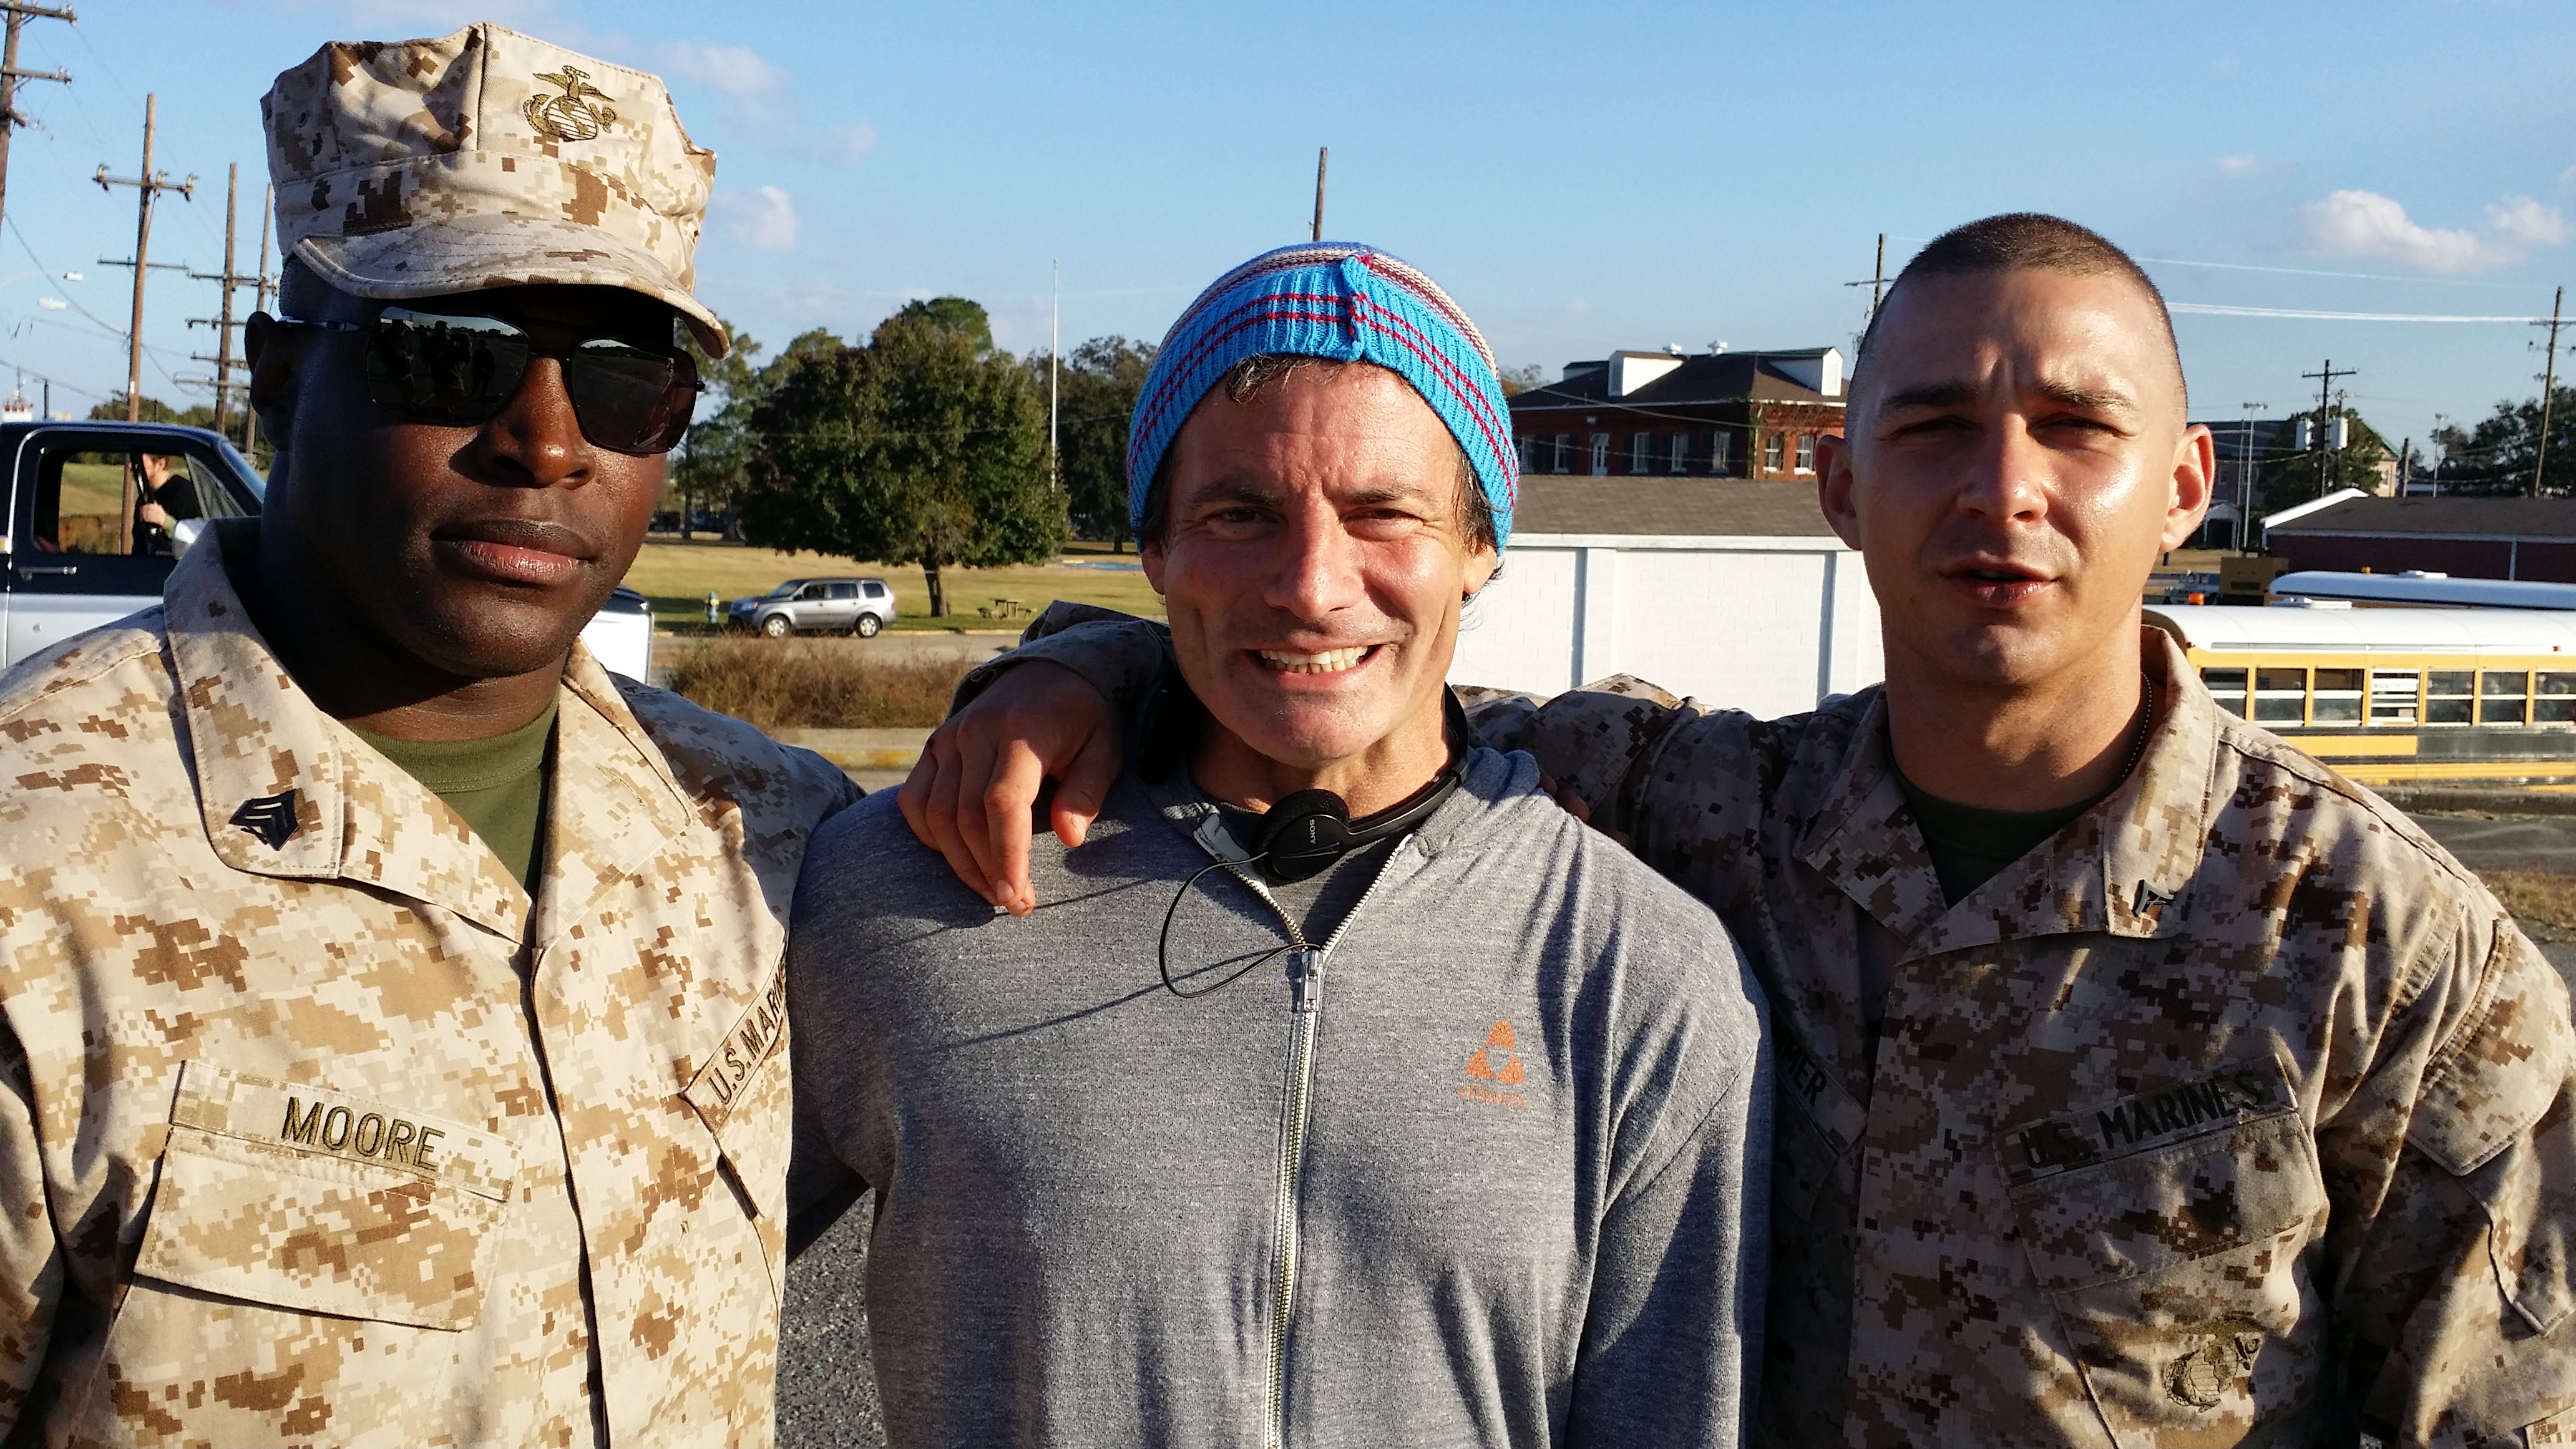 Nick Jones Jr., Dito Montiel, and Shia LaBeouf on the set of Man Down.